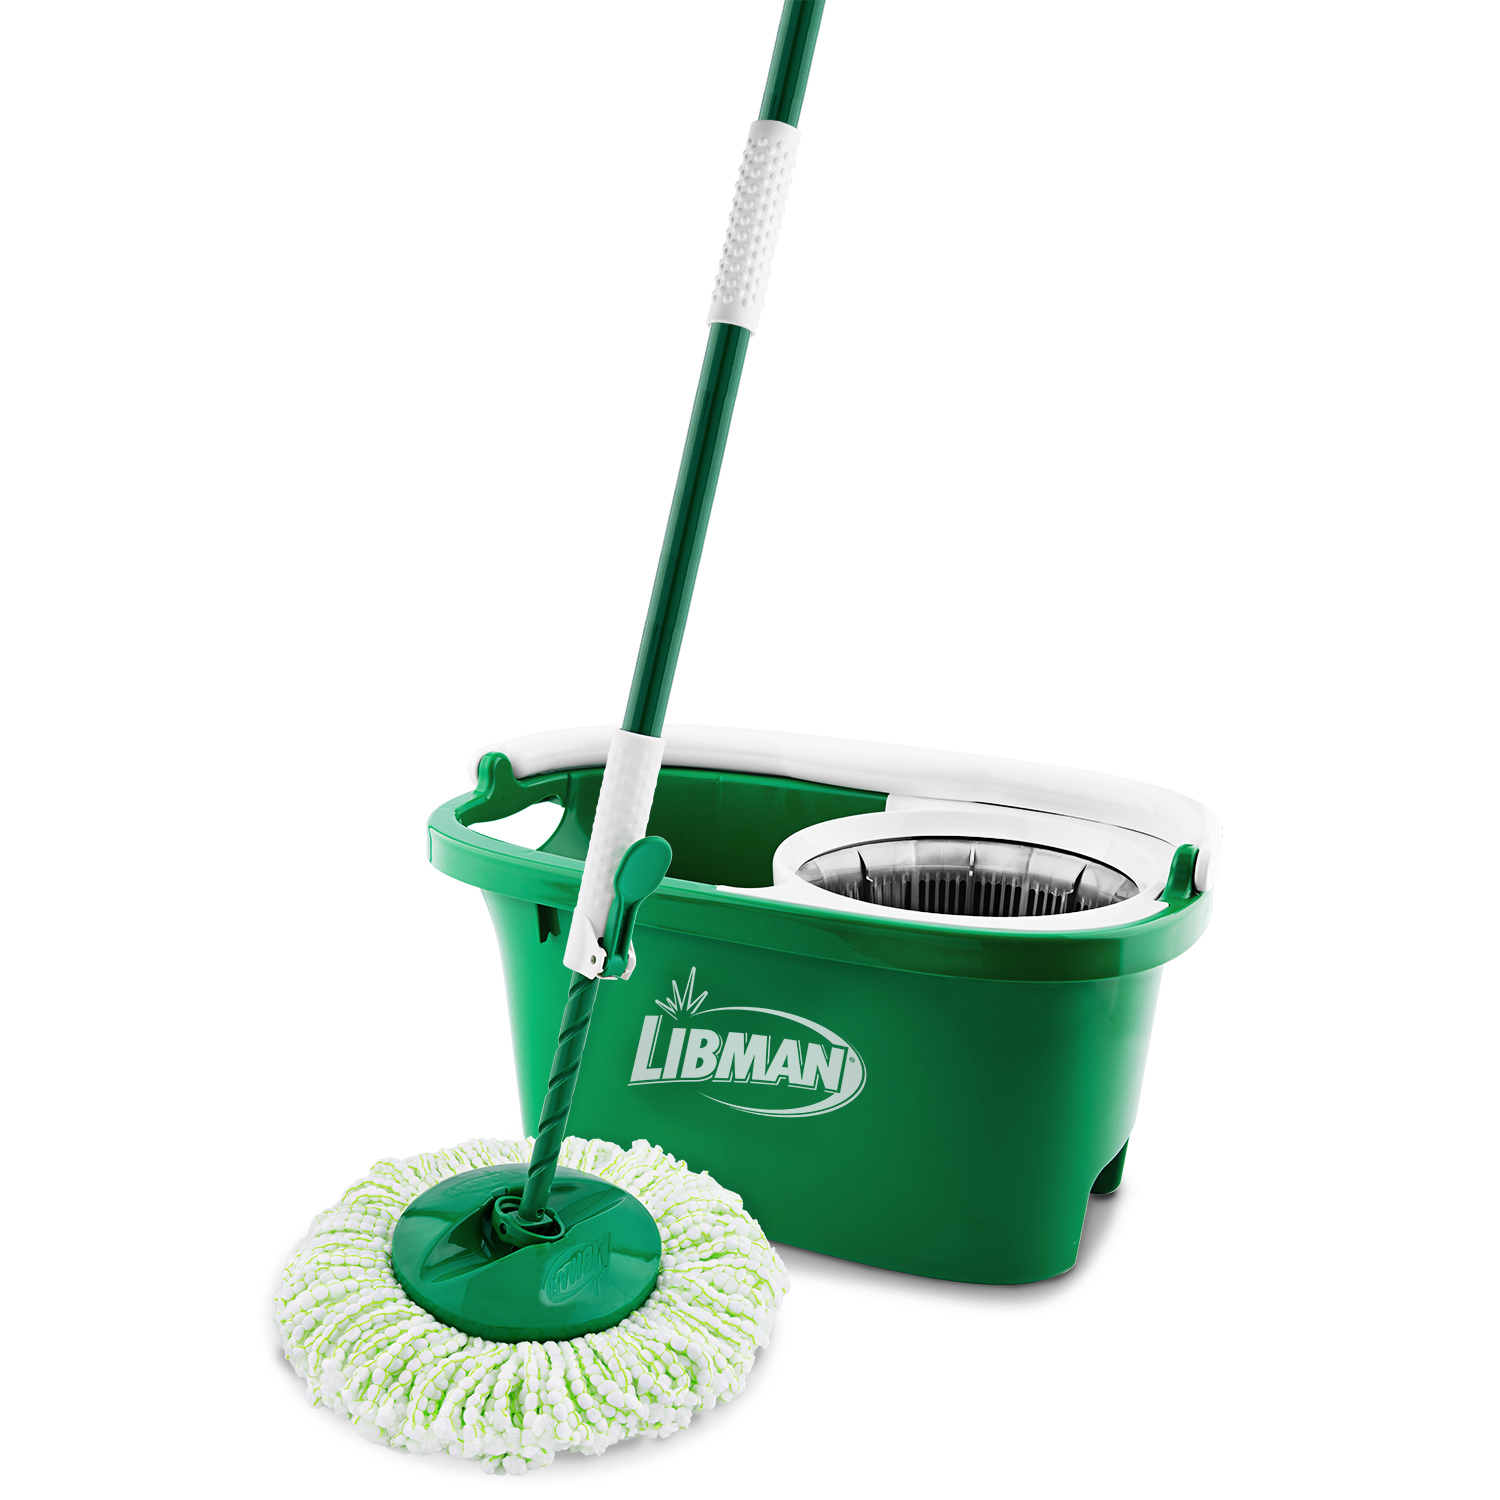 Looking to Buy The Best Spin Mop in 2023. Consider These 10 Key Factors